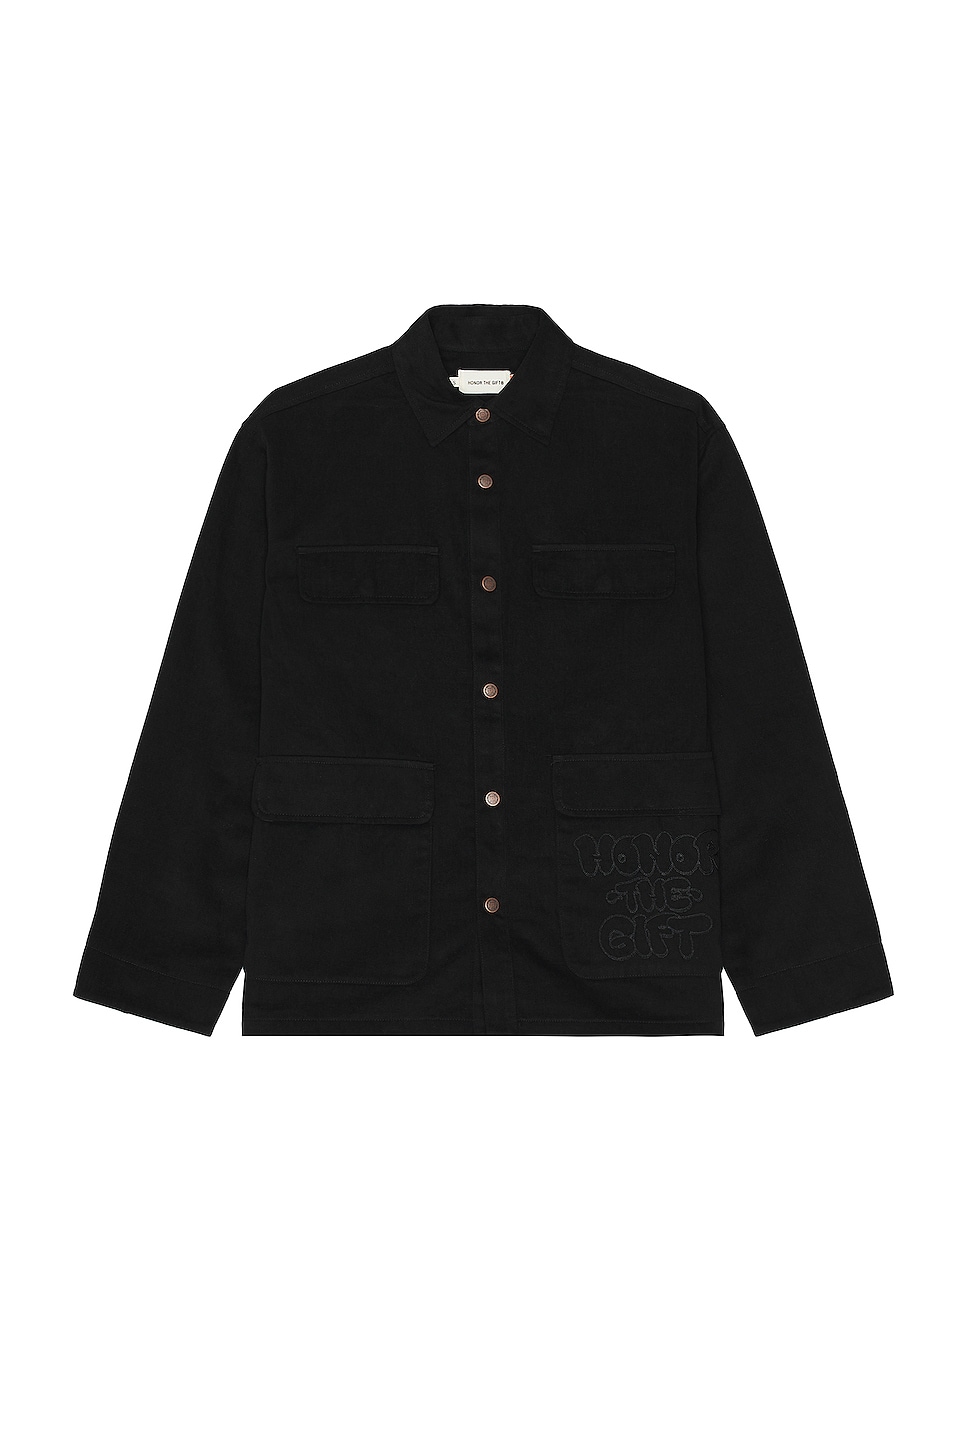 Image 1 of Honor The Gift Amp'd Chore Jacket in Black